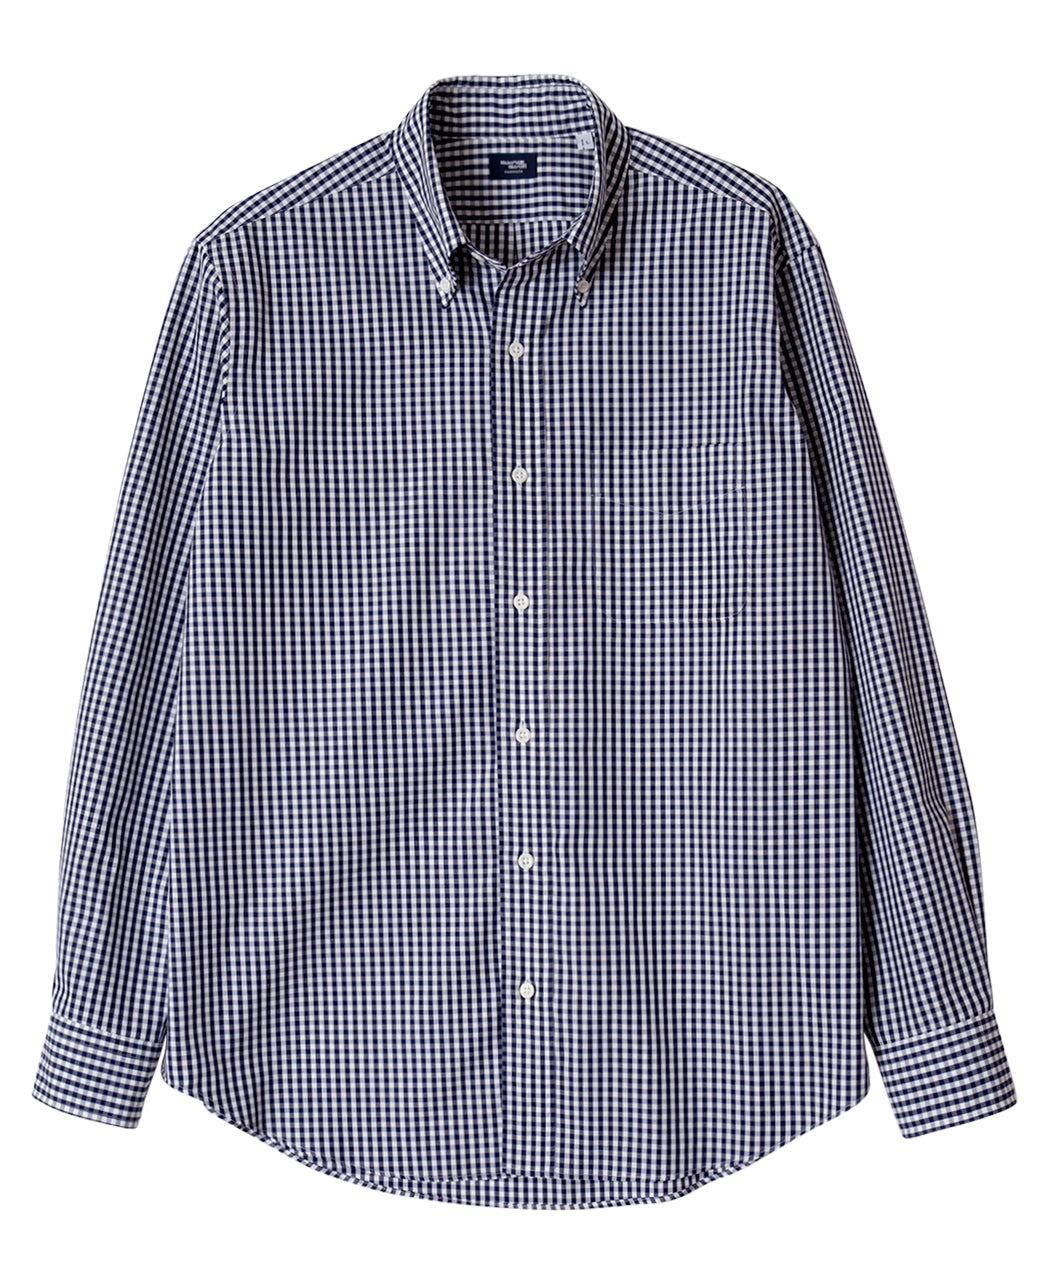 TOKYO FIT - Casual Button Down Broadcloth